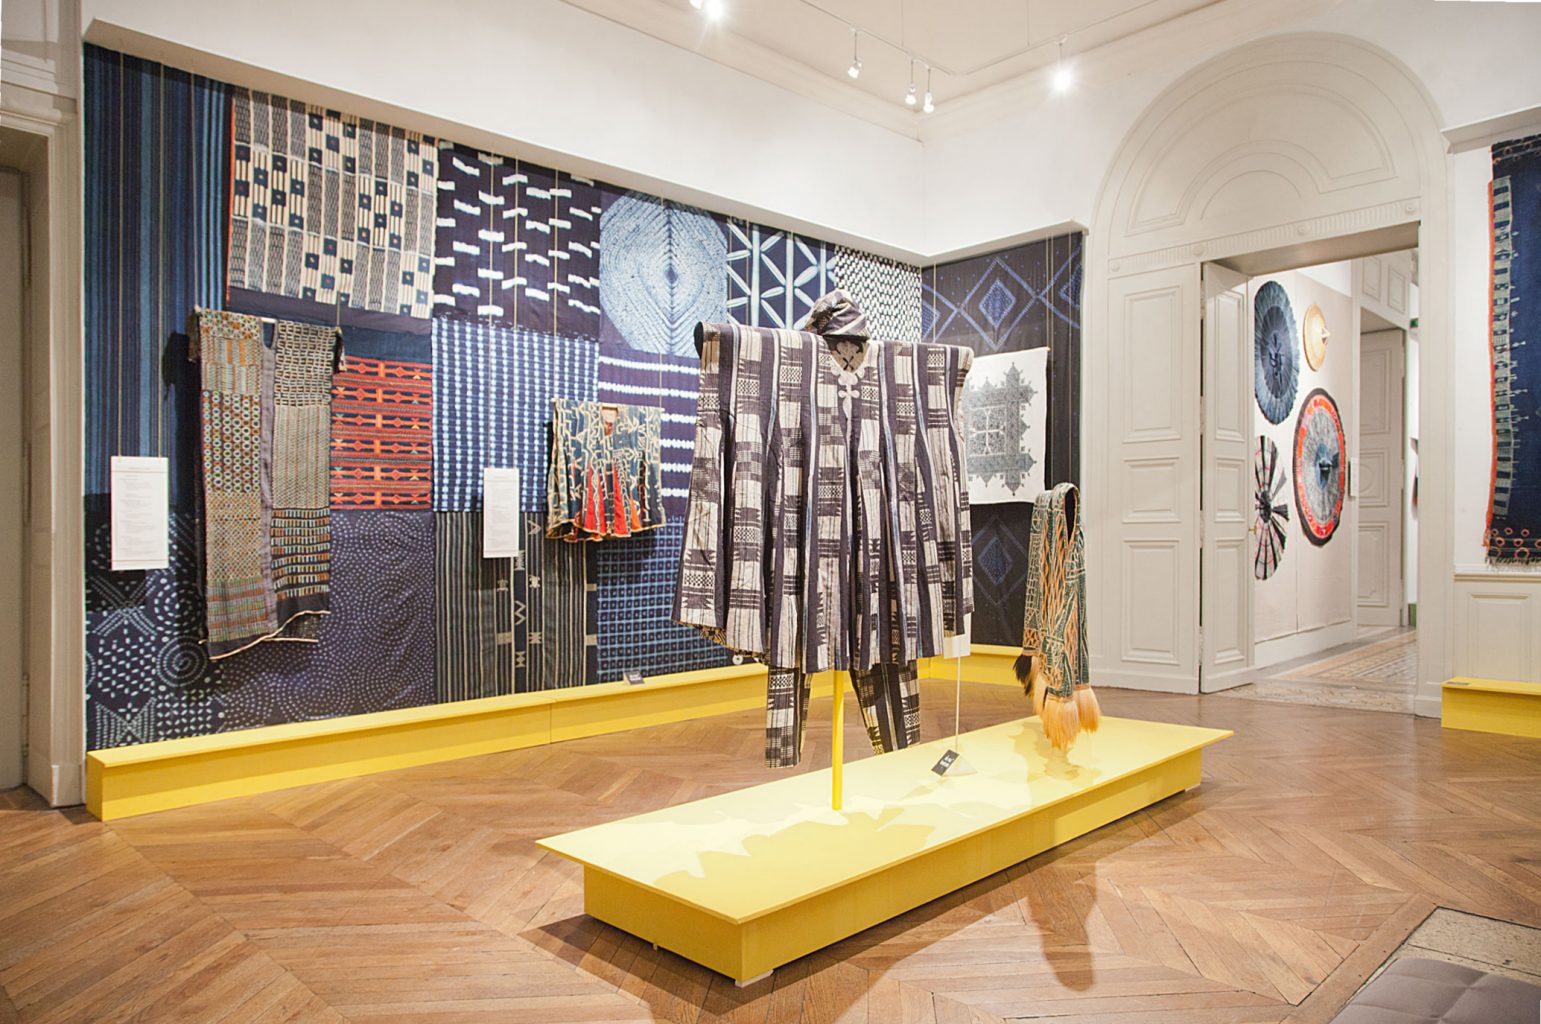 Indigo exhibition, curated by Catherine Legrand designed by In the shade of a tree studio, founded by Sophie Demay and Maël Fournier Comte with Lola Halifa-Legrand.